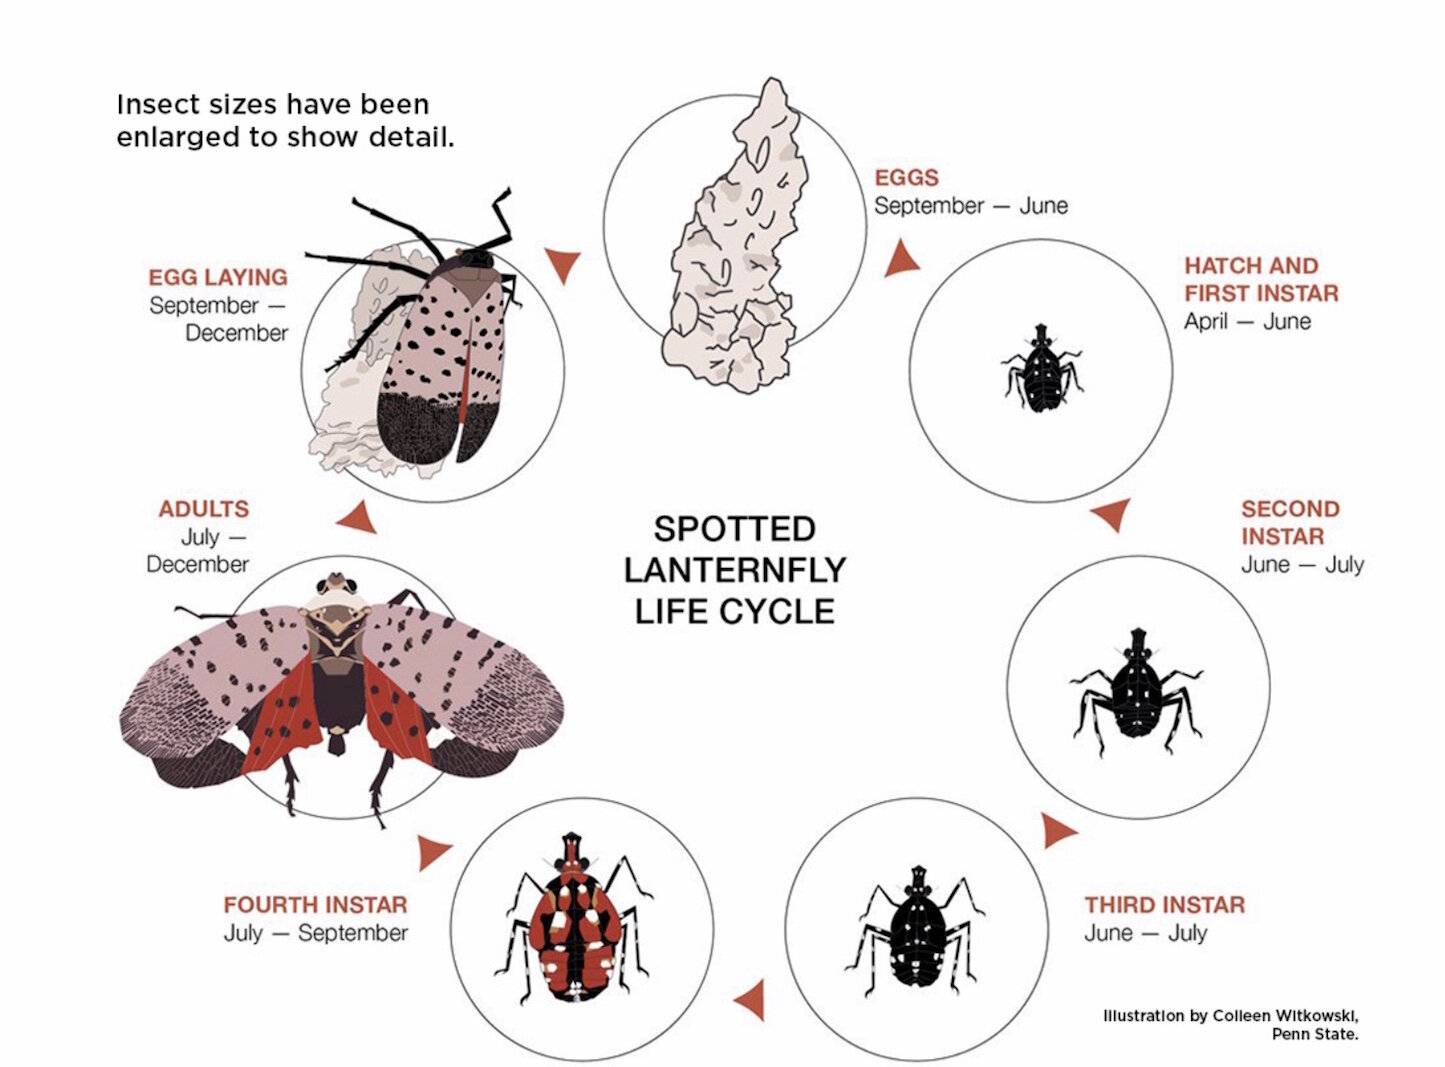 The lifecycle of the Lanternfly